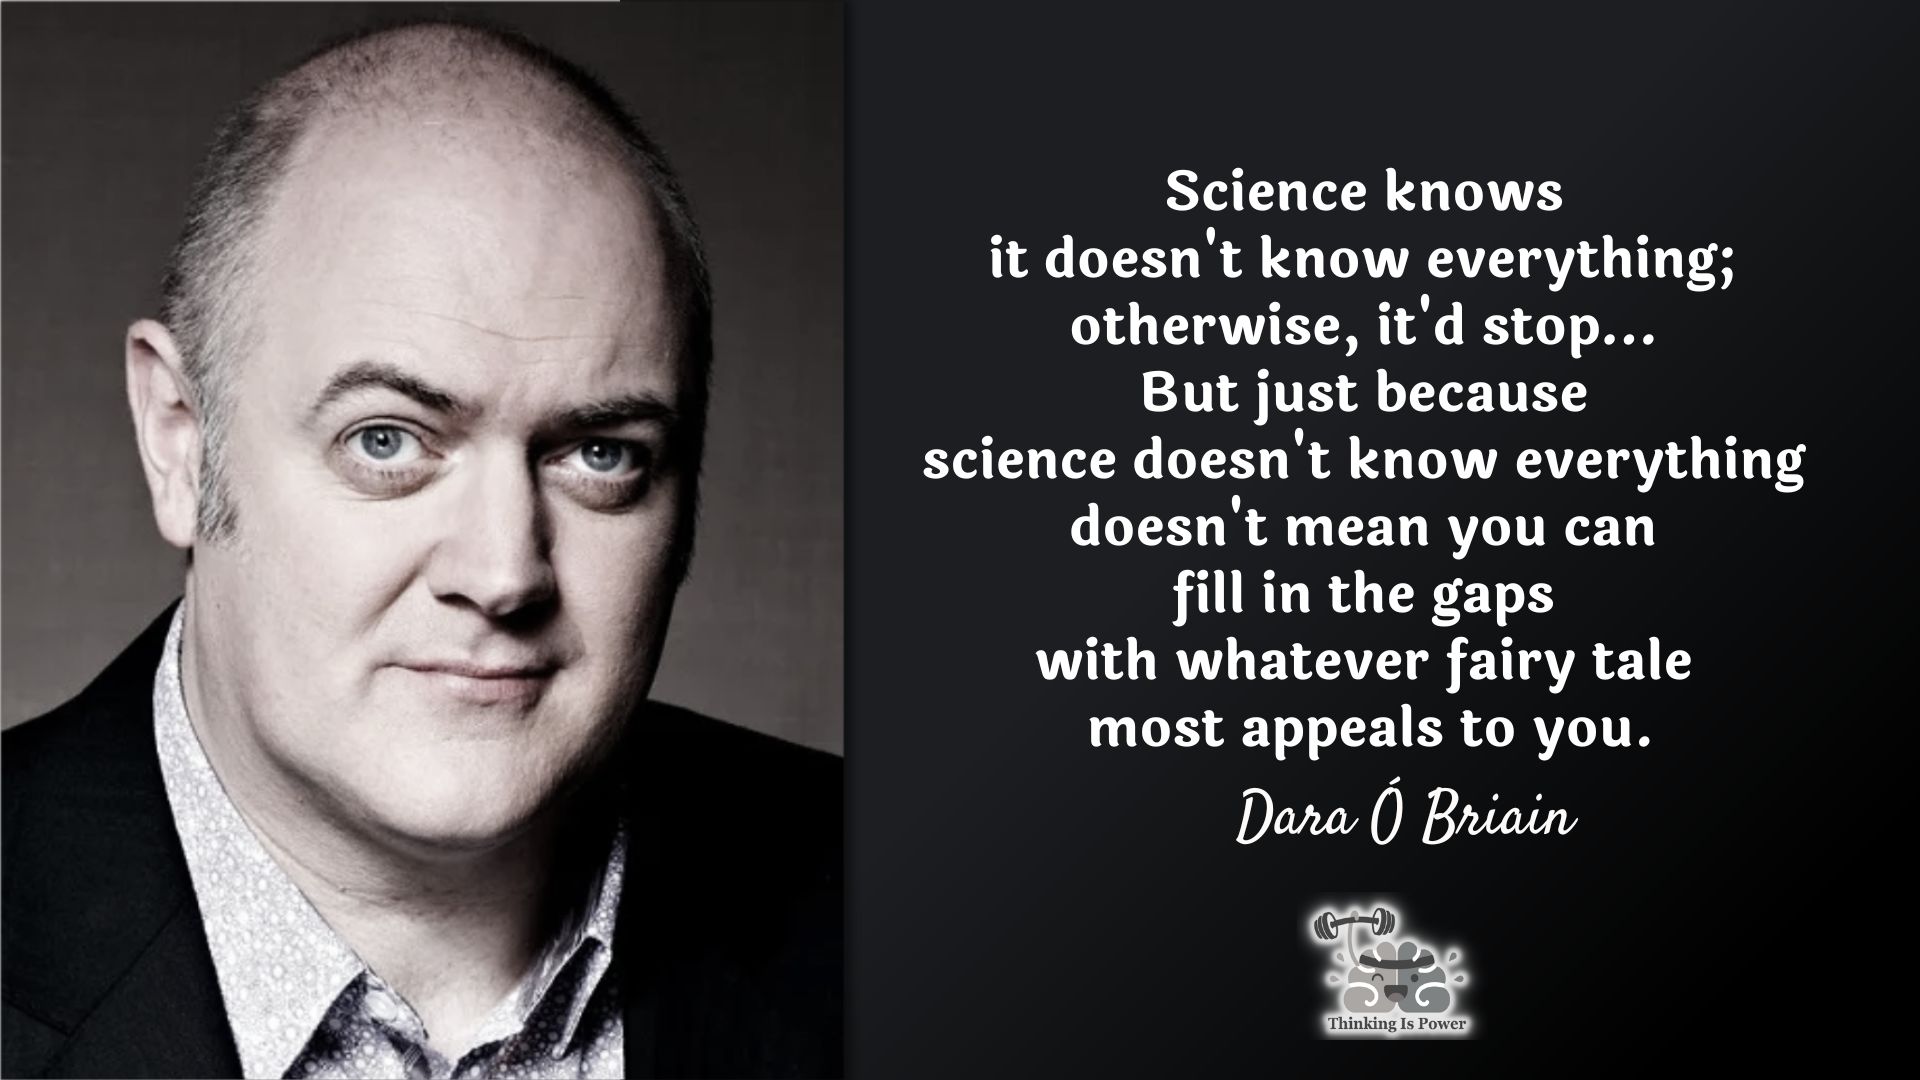 Dara Ó Briain quote: Science knows it doesn't know everything; otherwise, it'd stop...But just because science doesn't know everything doesn't mean you can fill in the gaps with whatever fairy tale most appeals to you.